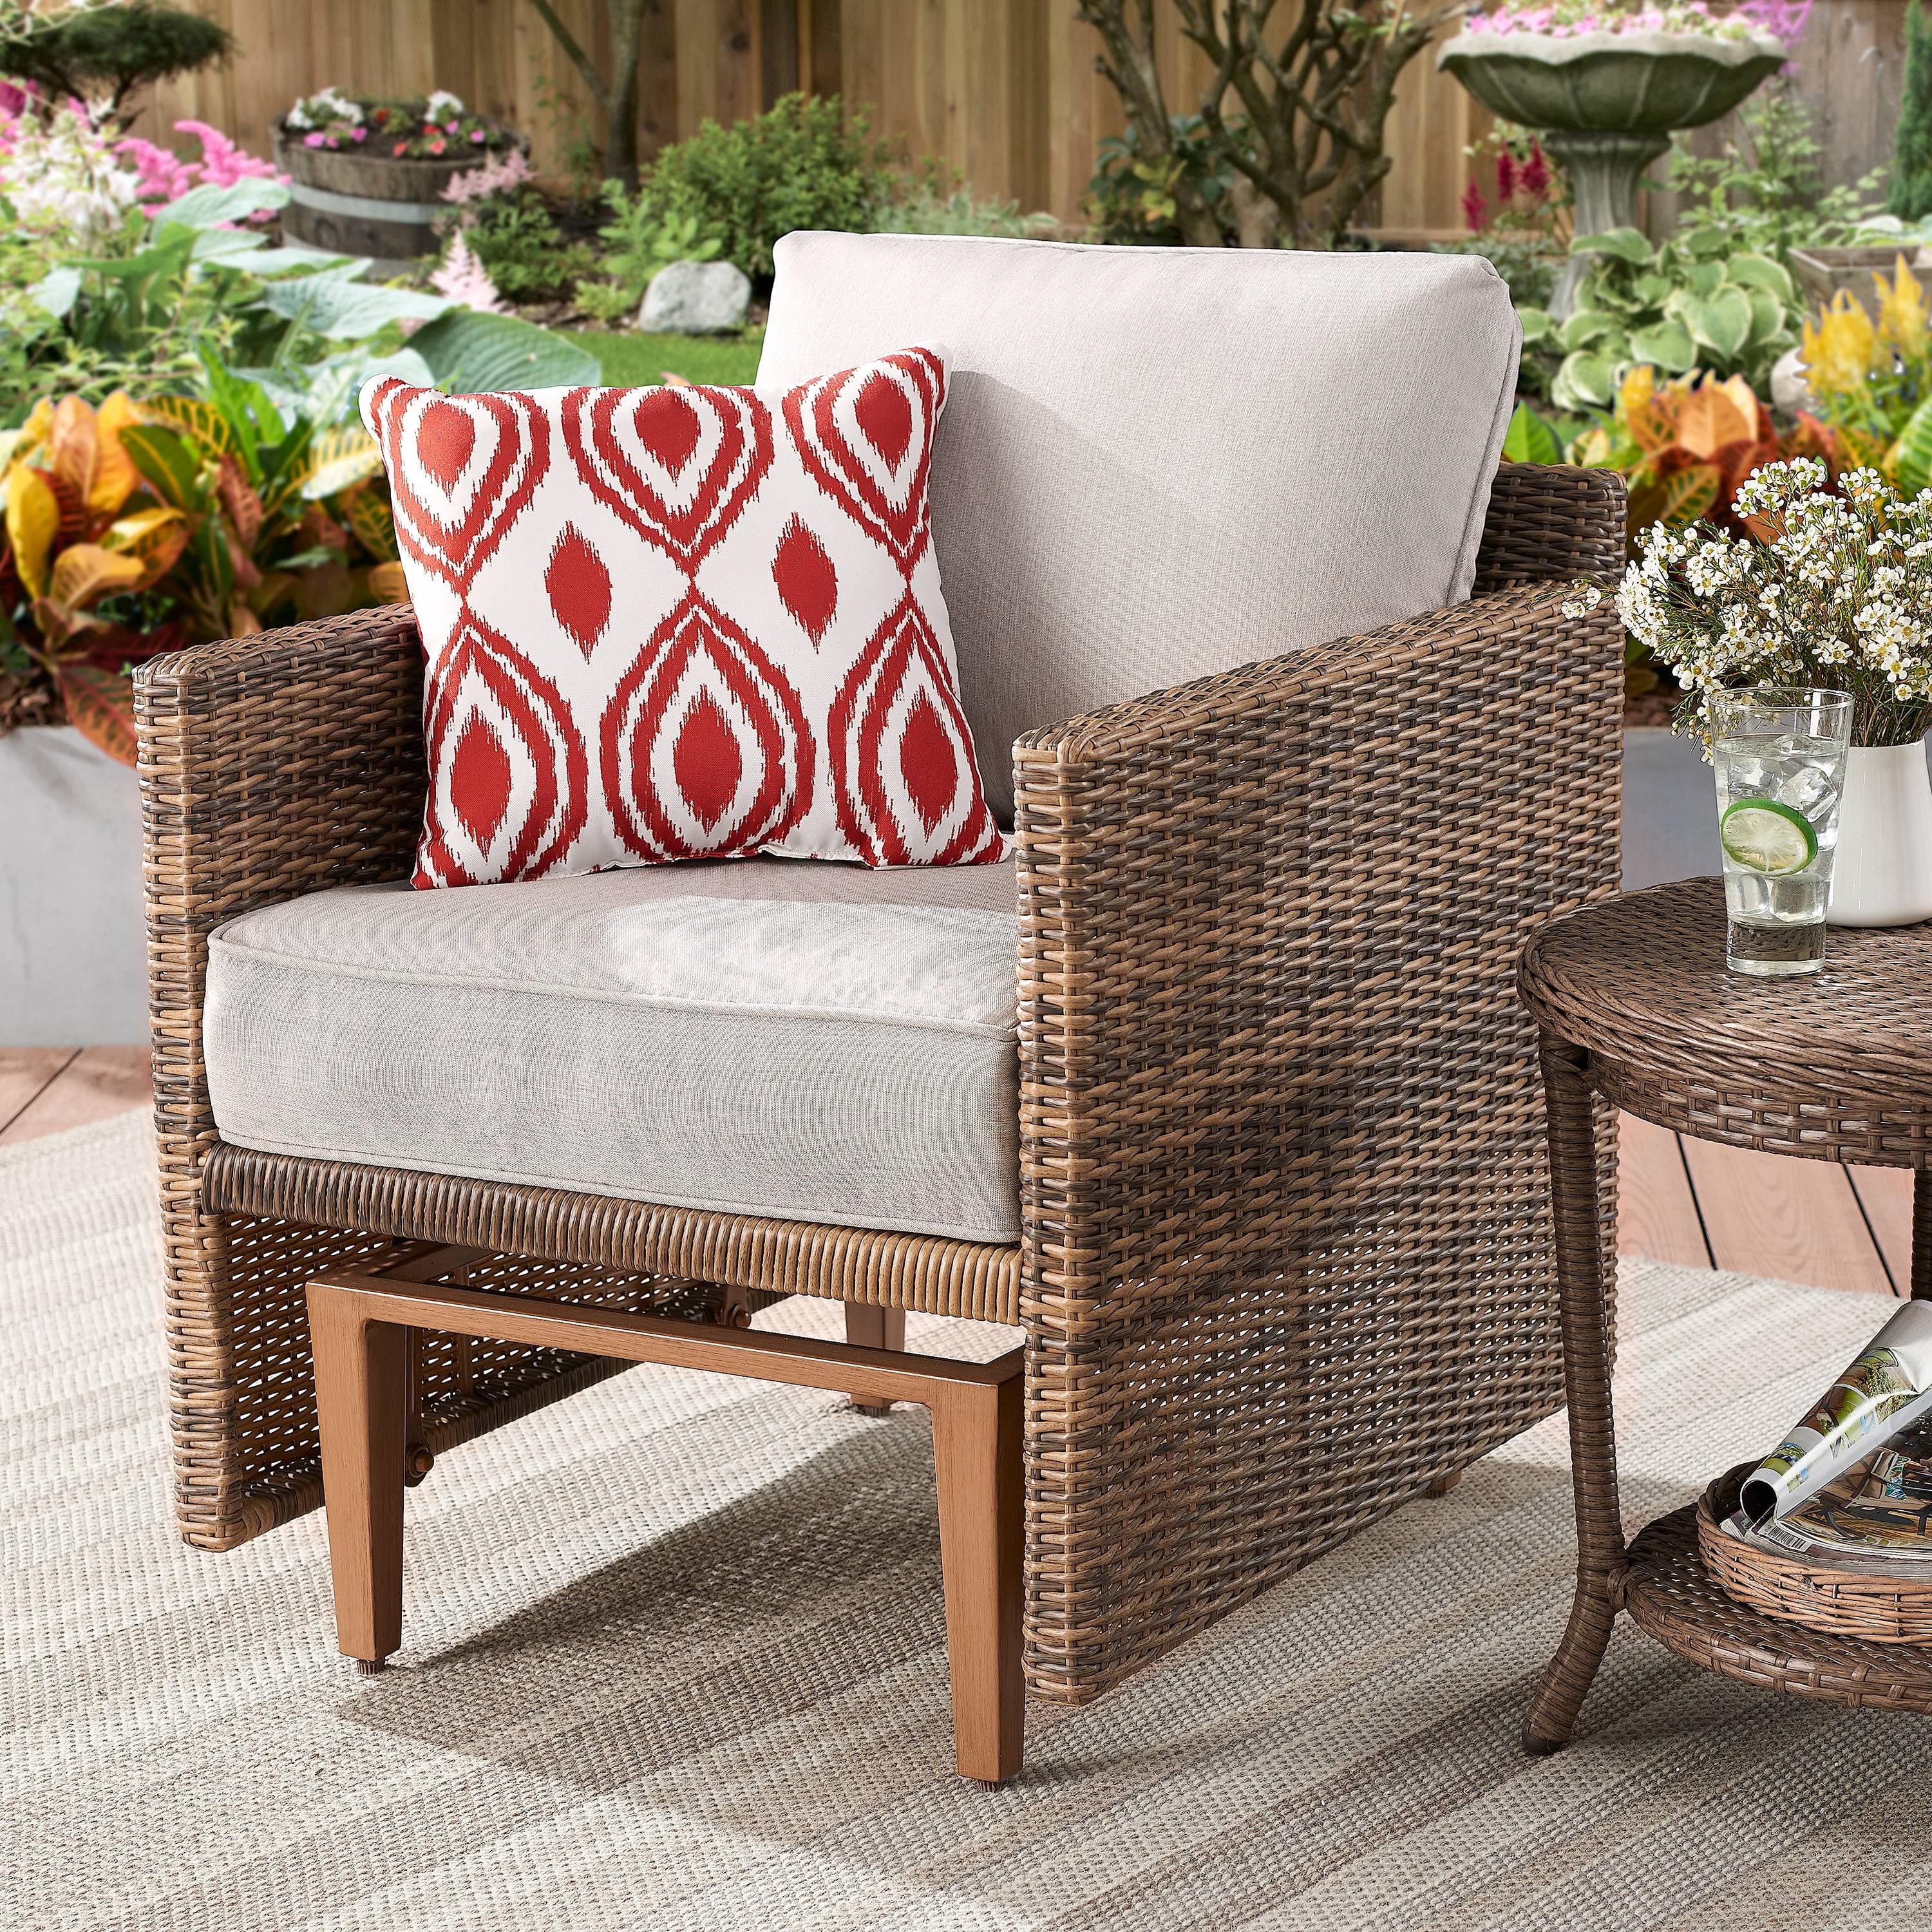 better homes and gardens patio furniture cushions